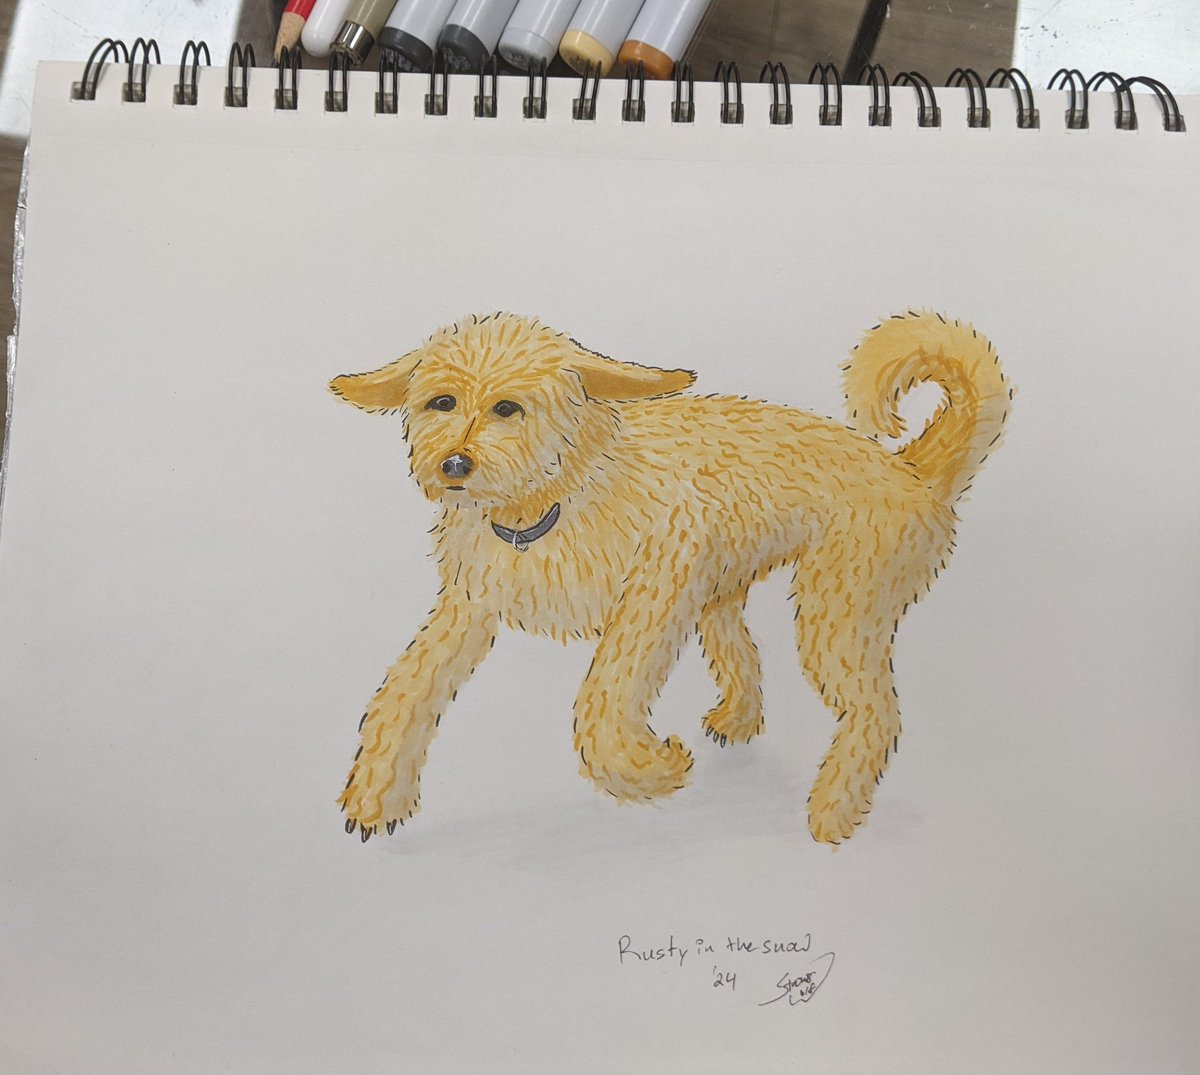 'Rusty in the snow'
My #goldendoodle loves the #snow. Copic on medium tooth sketch.
 #goldenfur #poodle #labradoodle